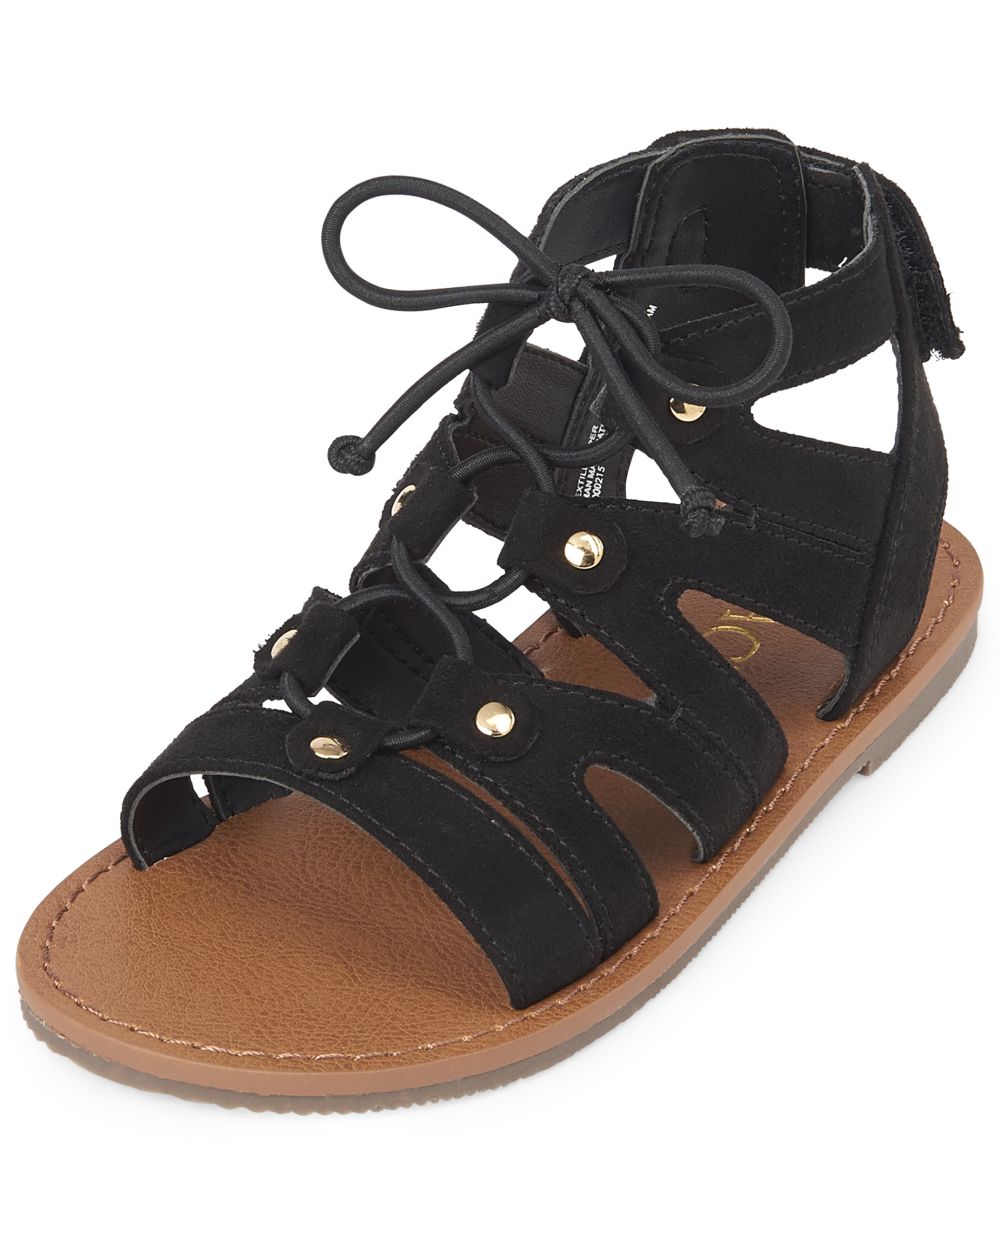 Toddler Girls Lace Up Faux Suede Gladiator Sandals